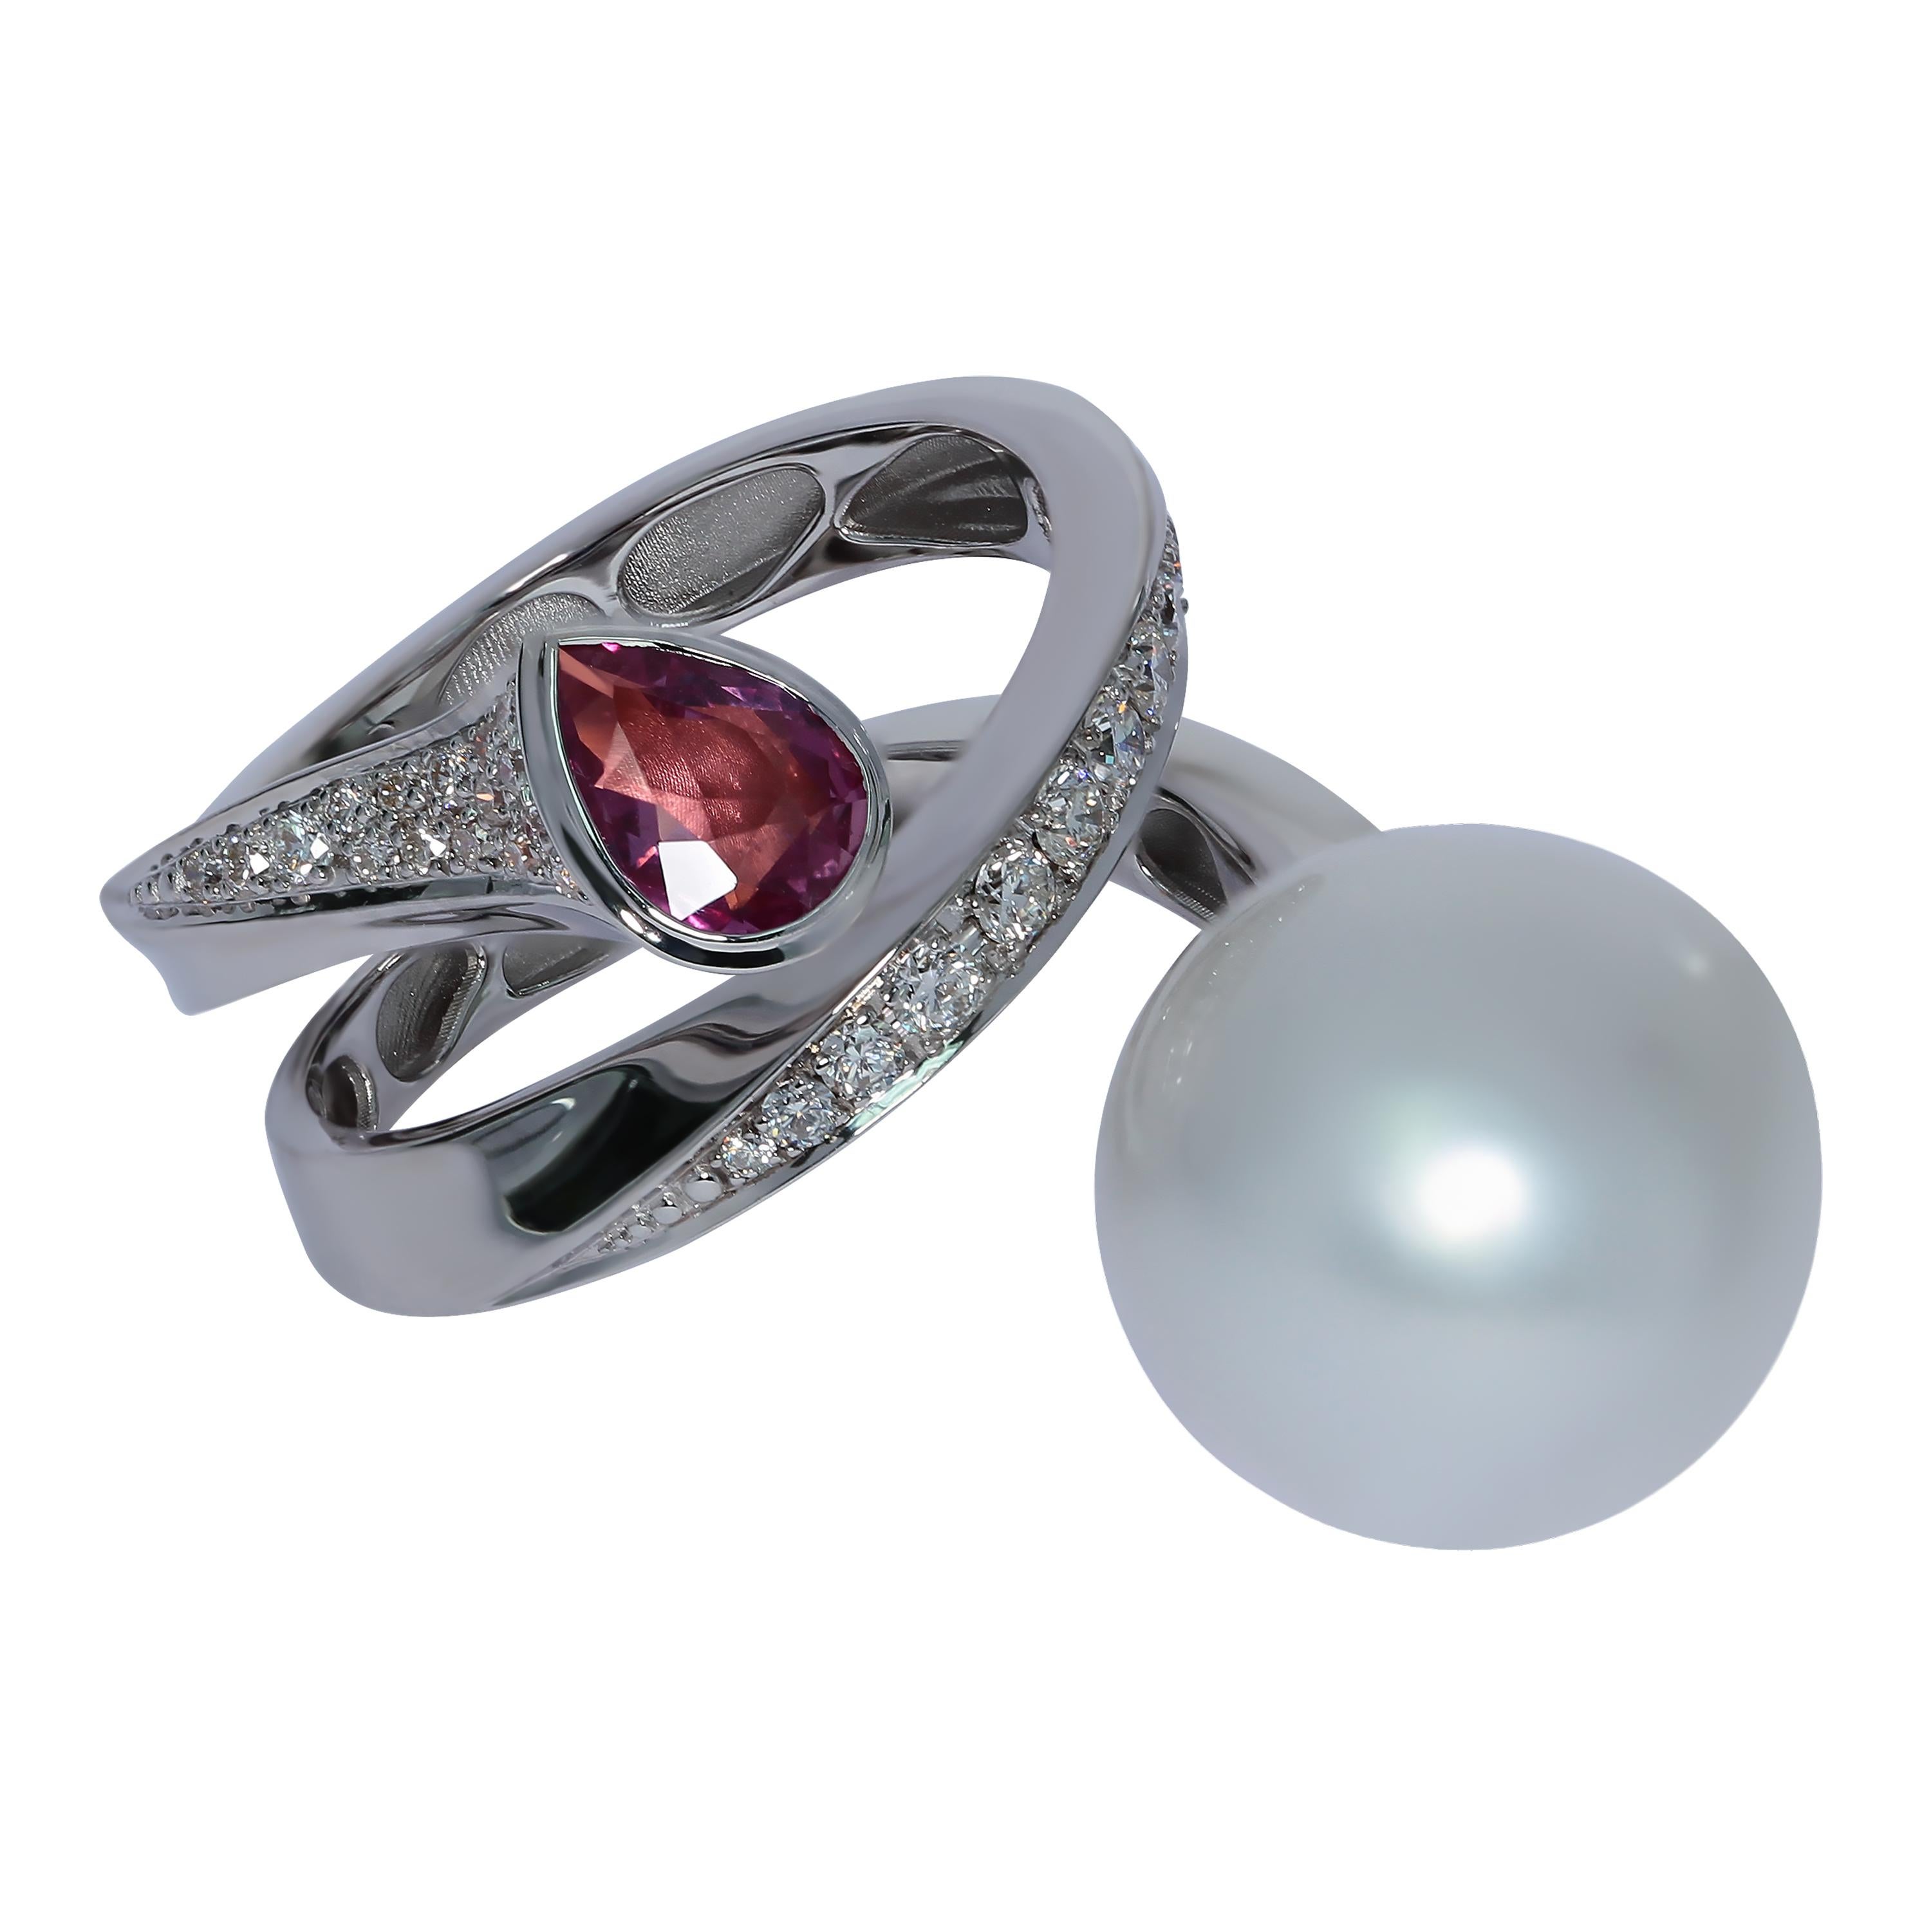 Diamonds Pink Sapphire South Sea Pearl 18 Karat White Gold Ring
Ring is made in the shape of a spiral, symbolizing a water funnel, carrying it to the depth of the ocean, where a delightful South Sea Pearl 14 mm awaits us. Pink Sapphire totaling 0.77